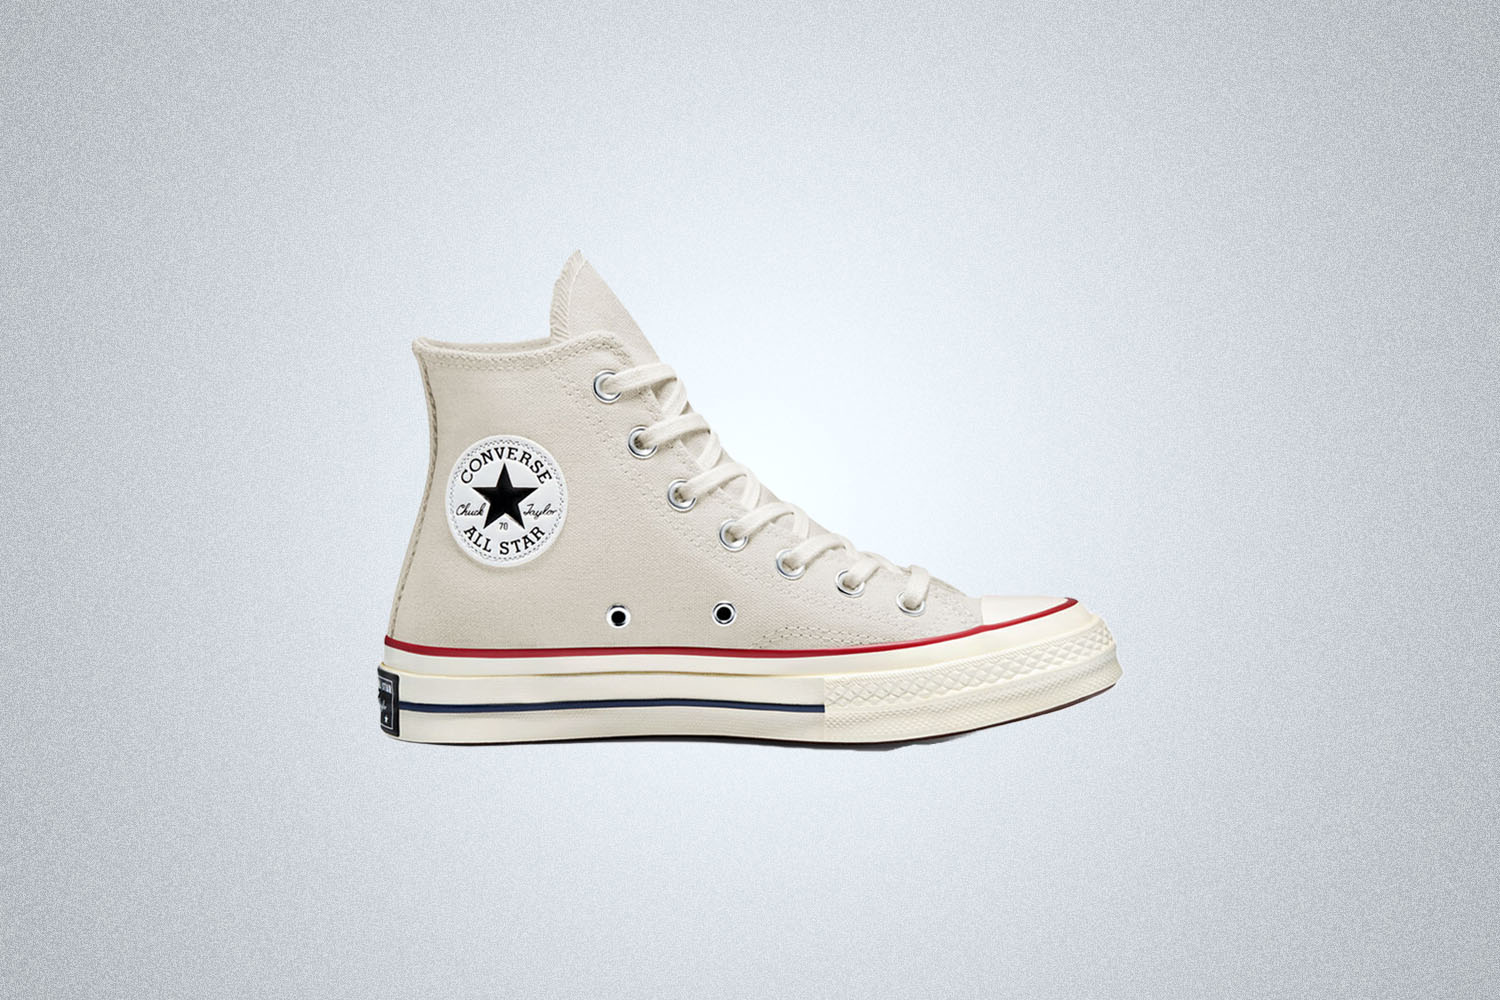 The Converse All Star 70s on a gray background